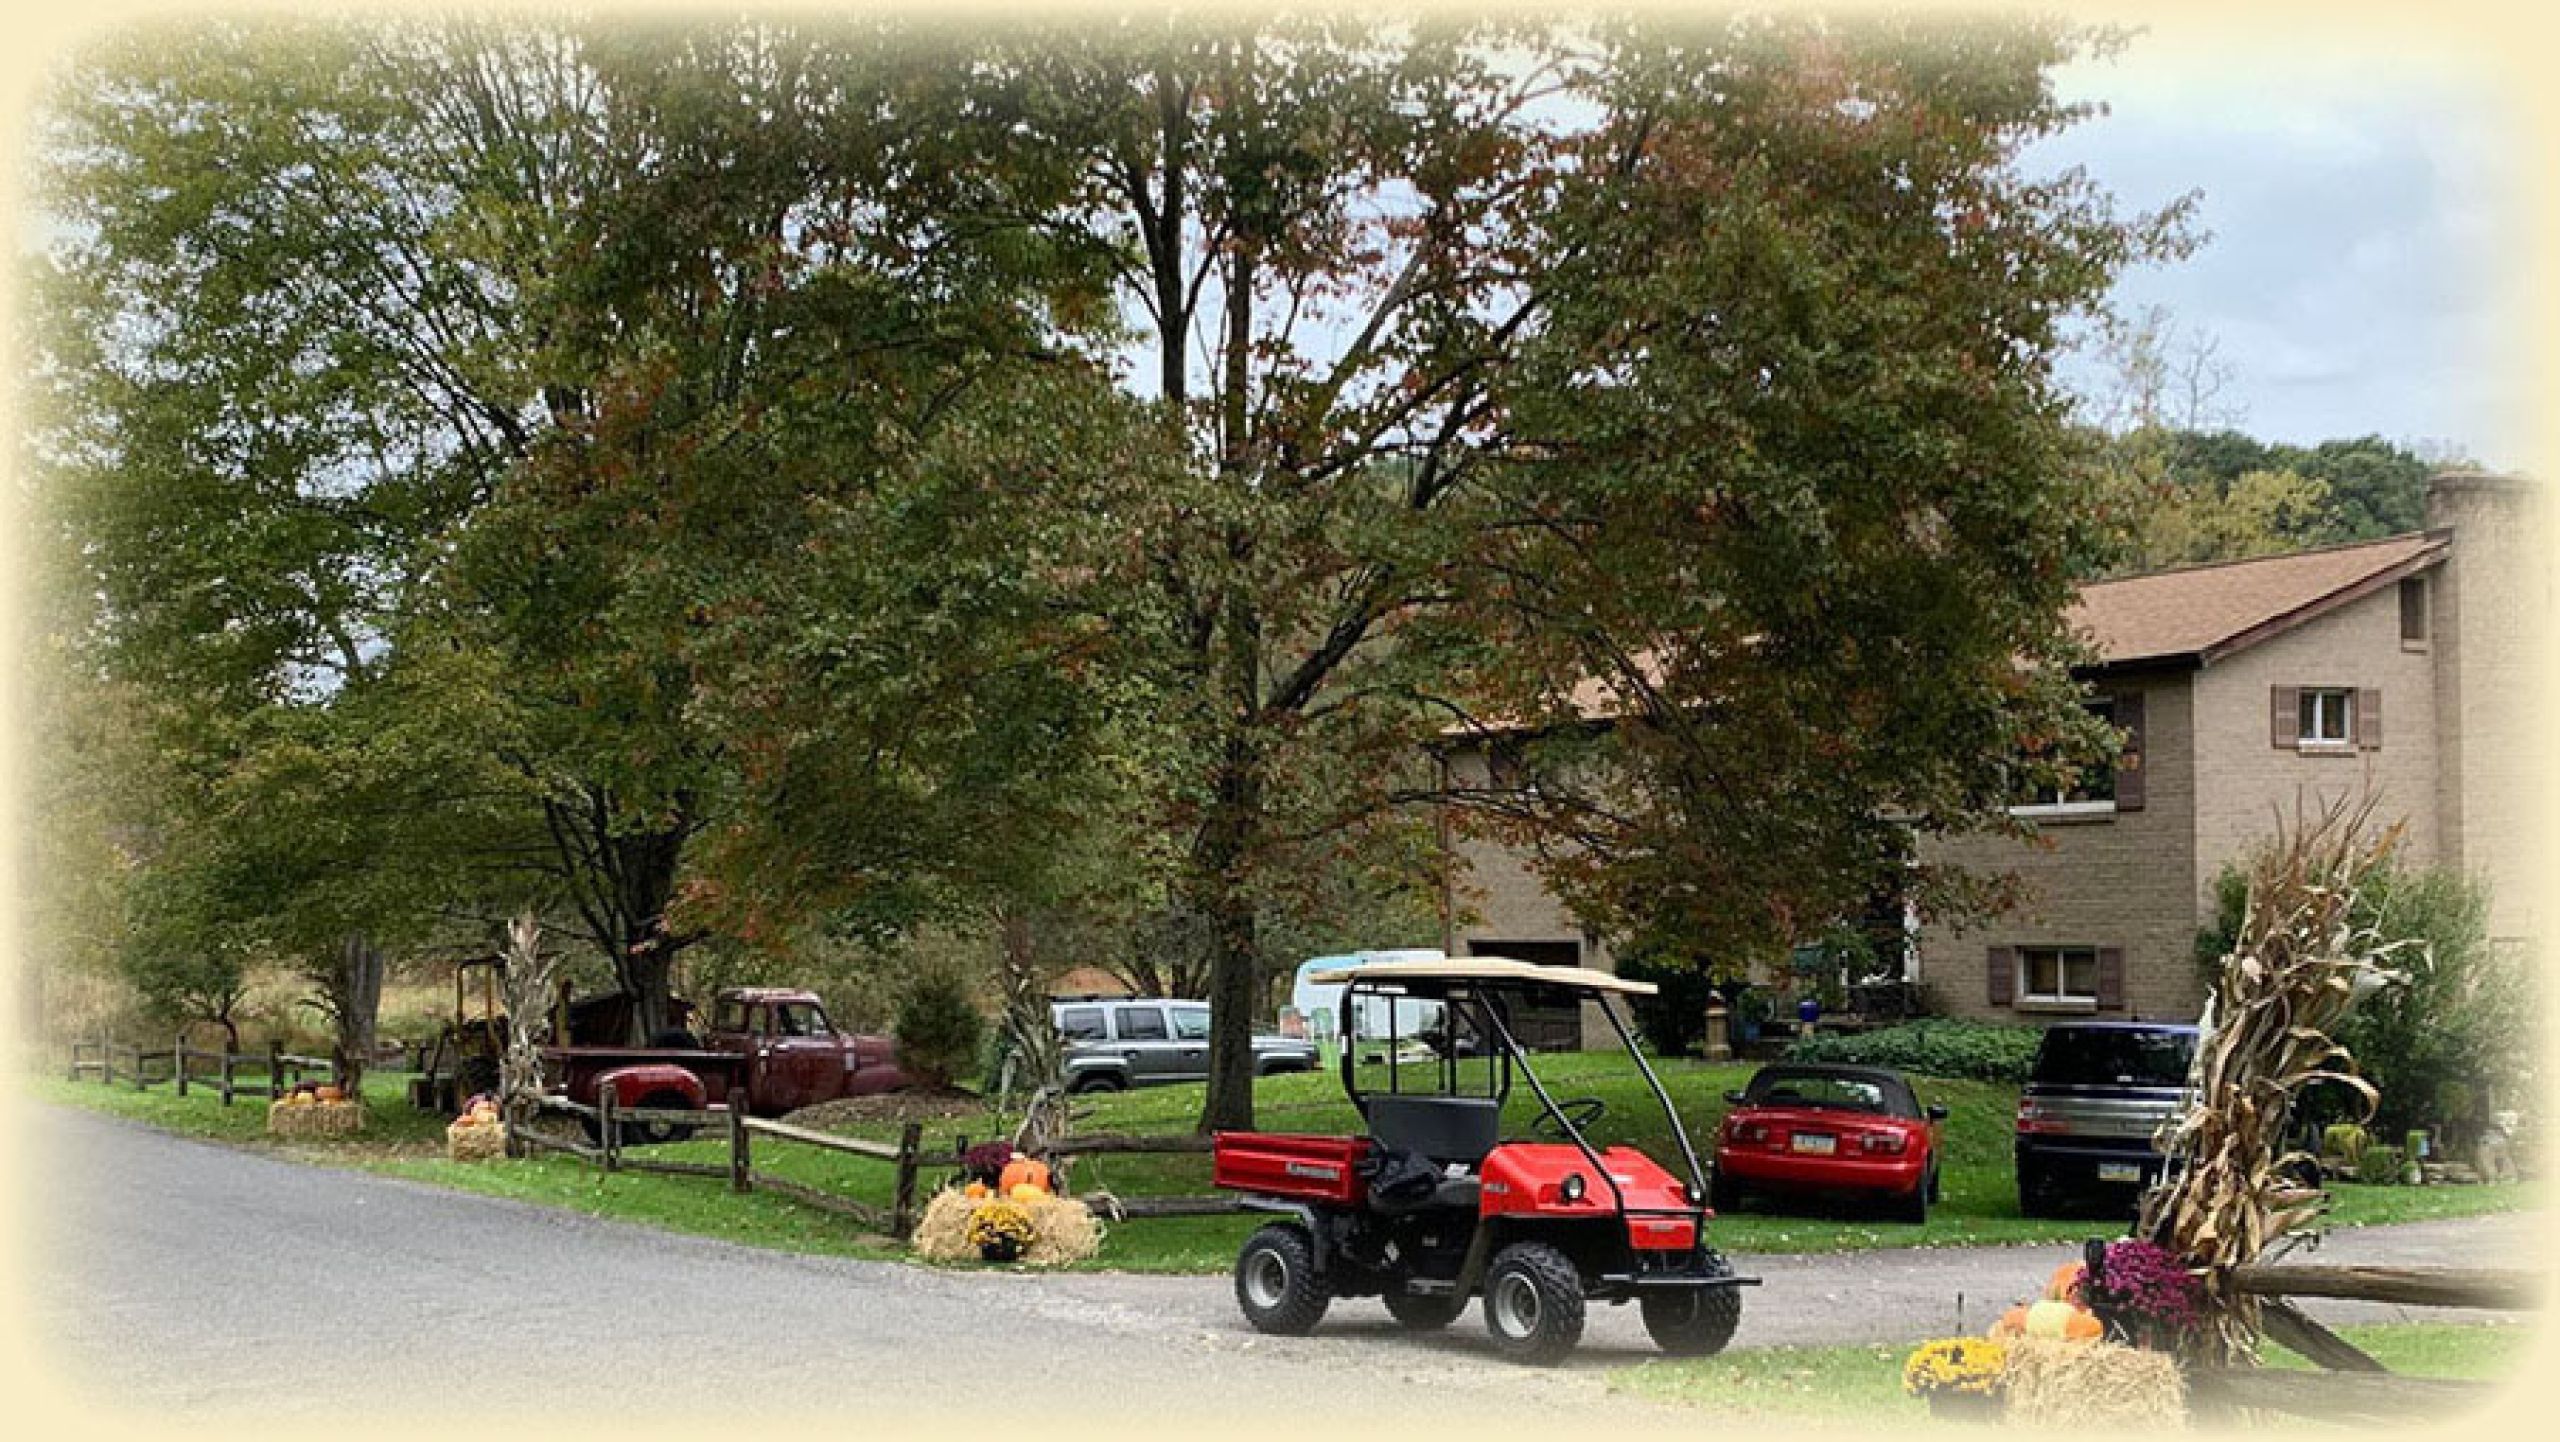 Landscape photo of Green Goose Farm with tree in the front yard and vehicles surrounding it